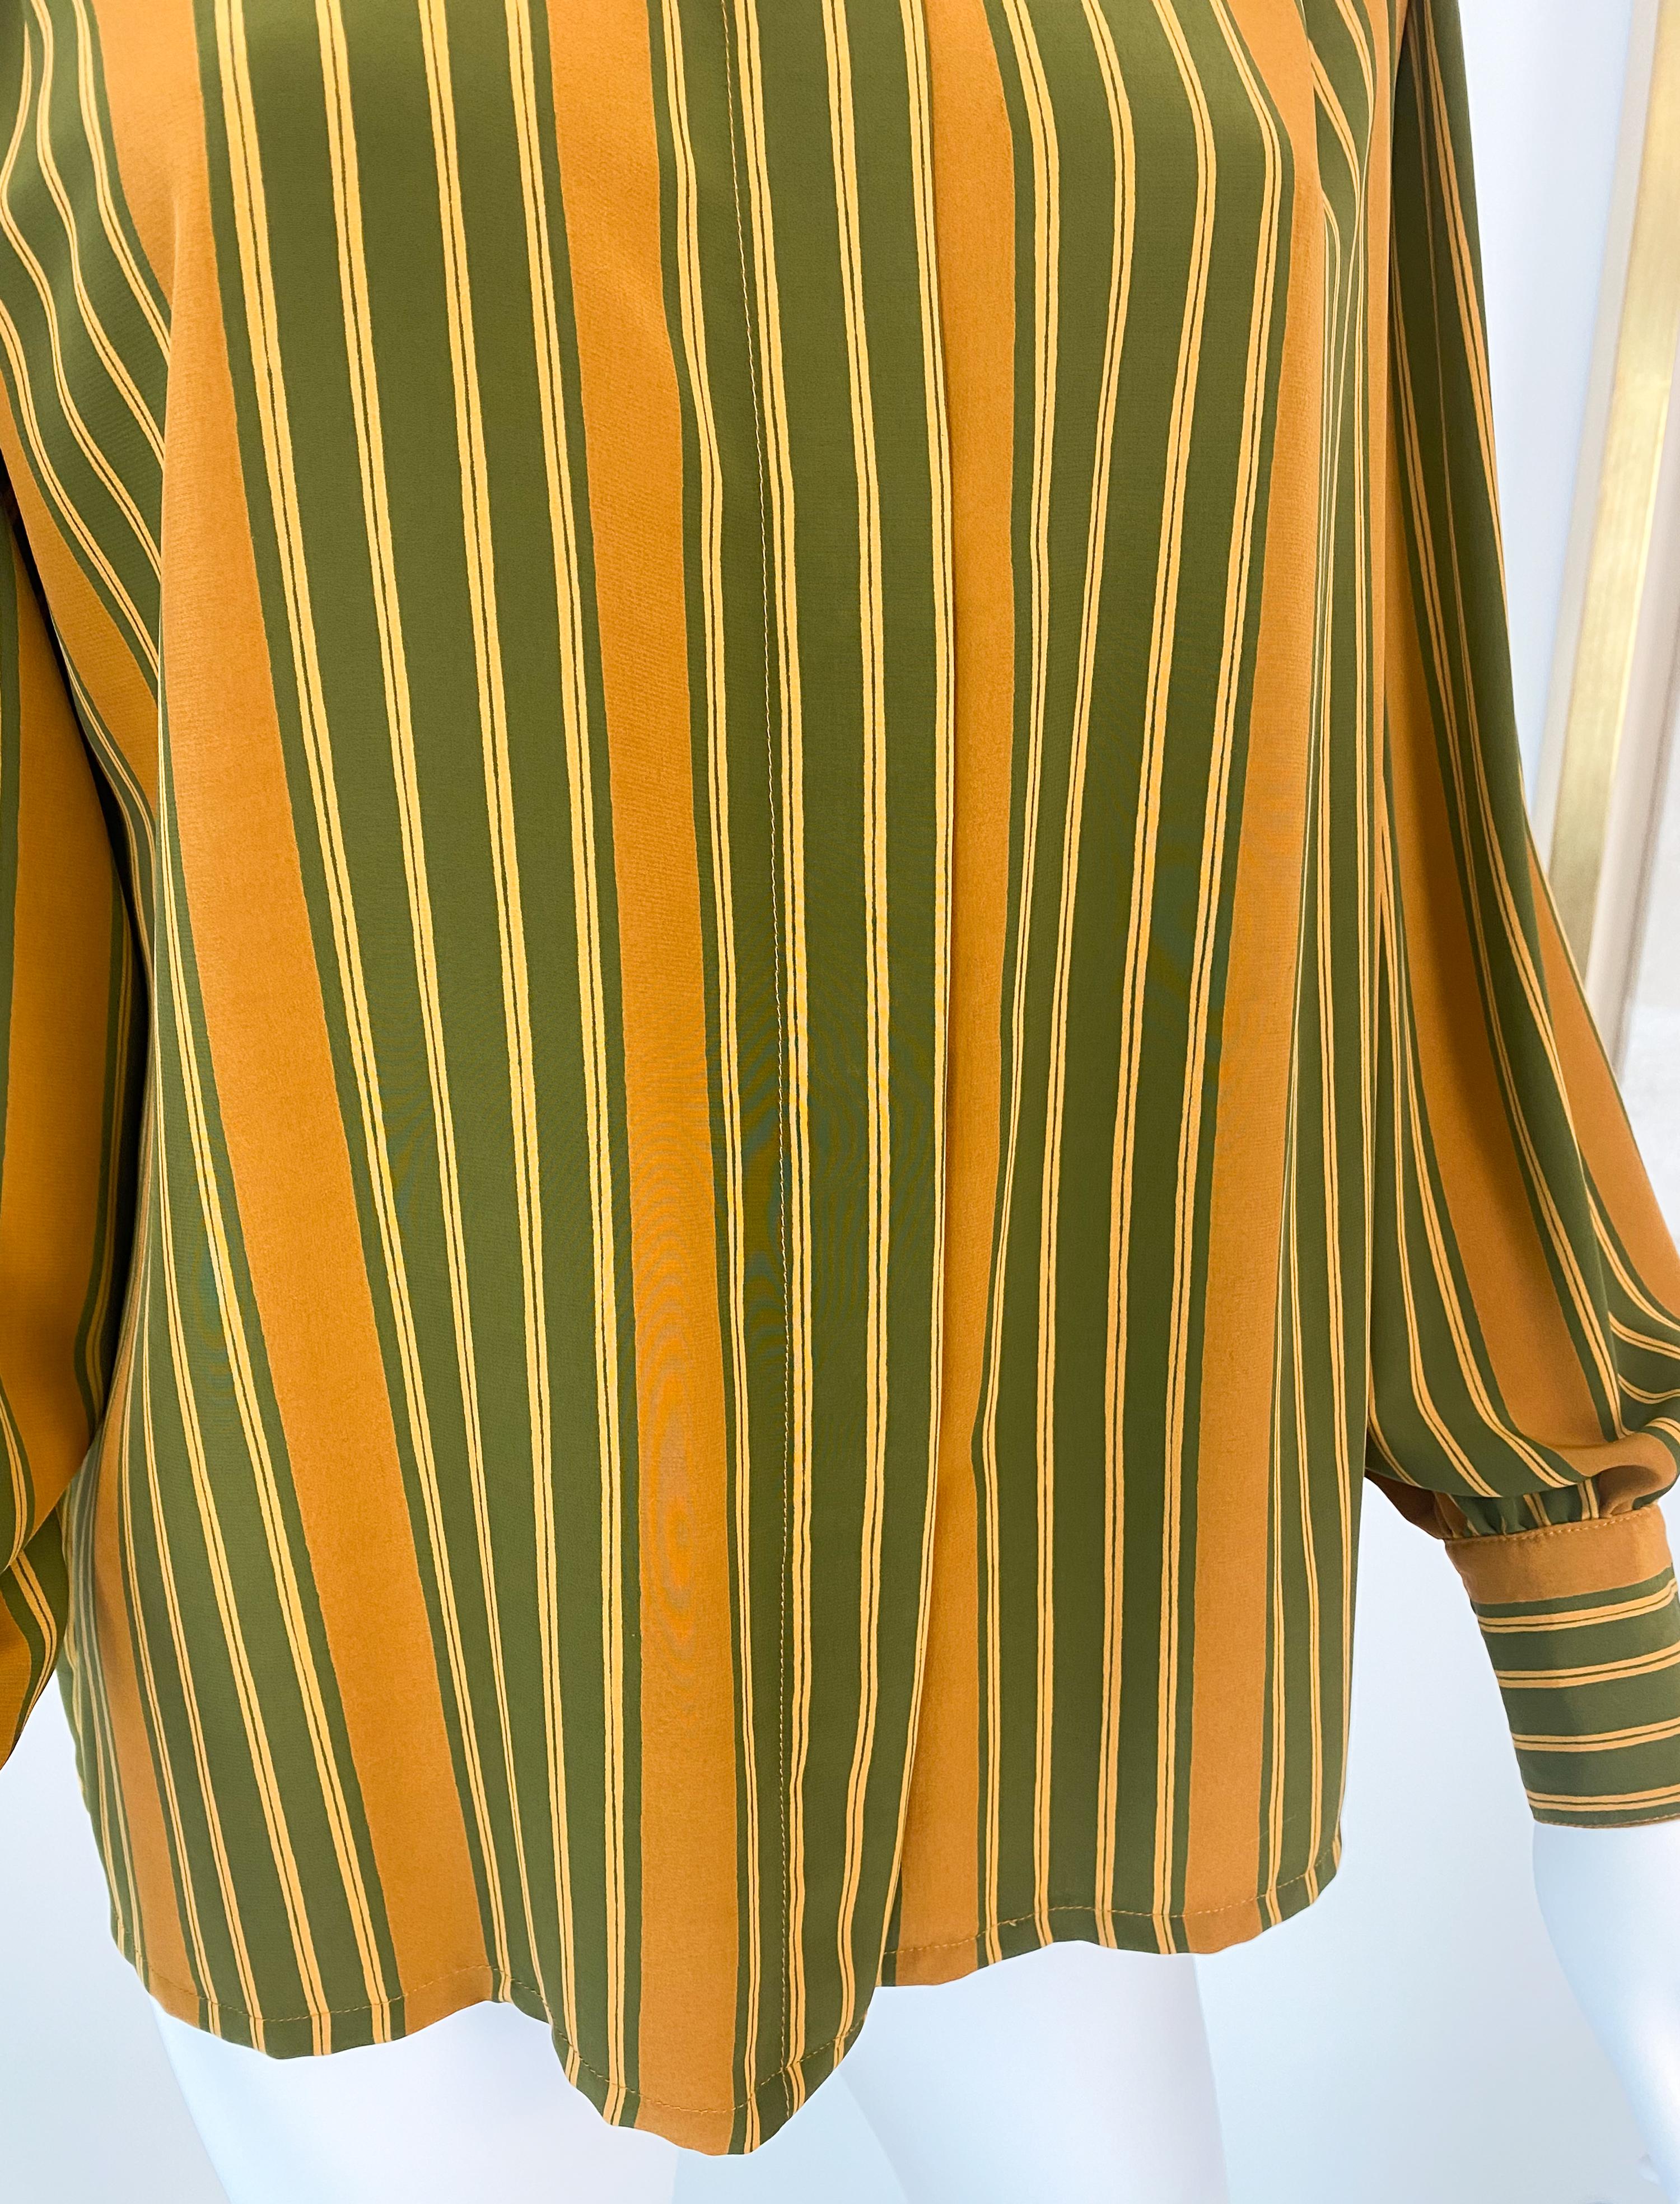 Vintage 1980s Silky Polyester Blouse Top Green and Saffran Stripes Size 10/12 For Sale 8